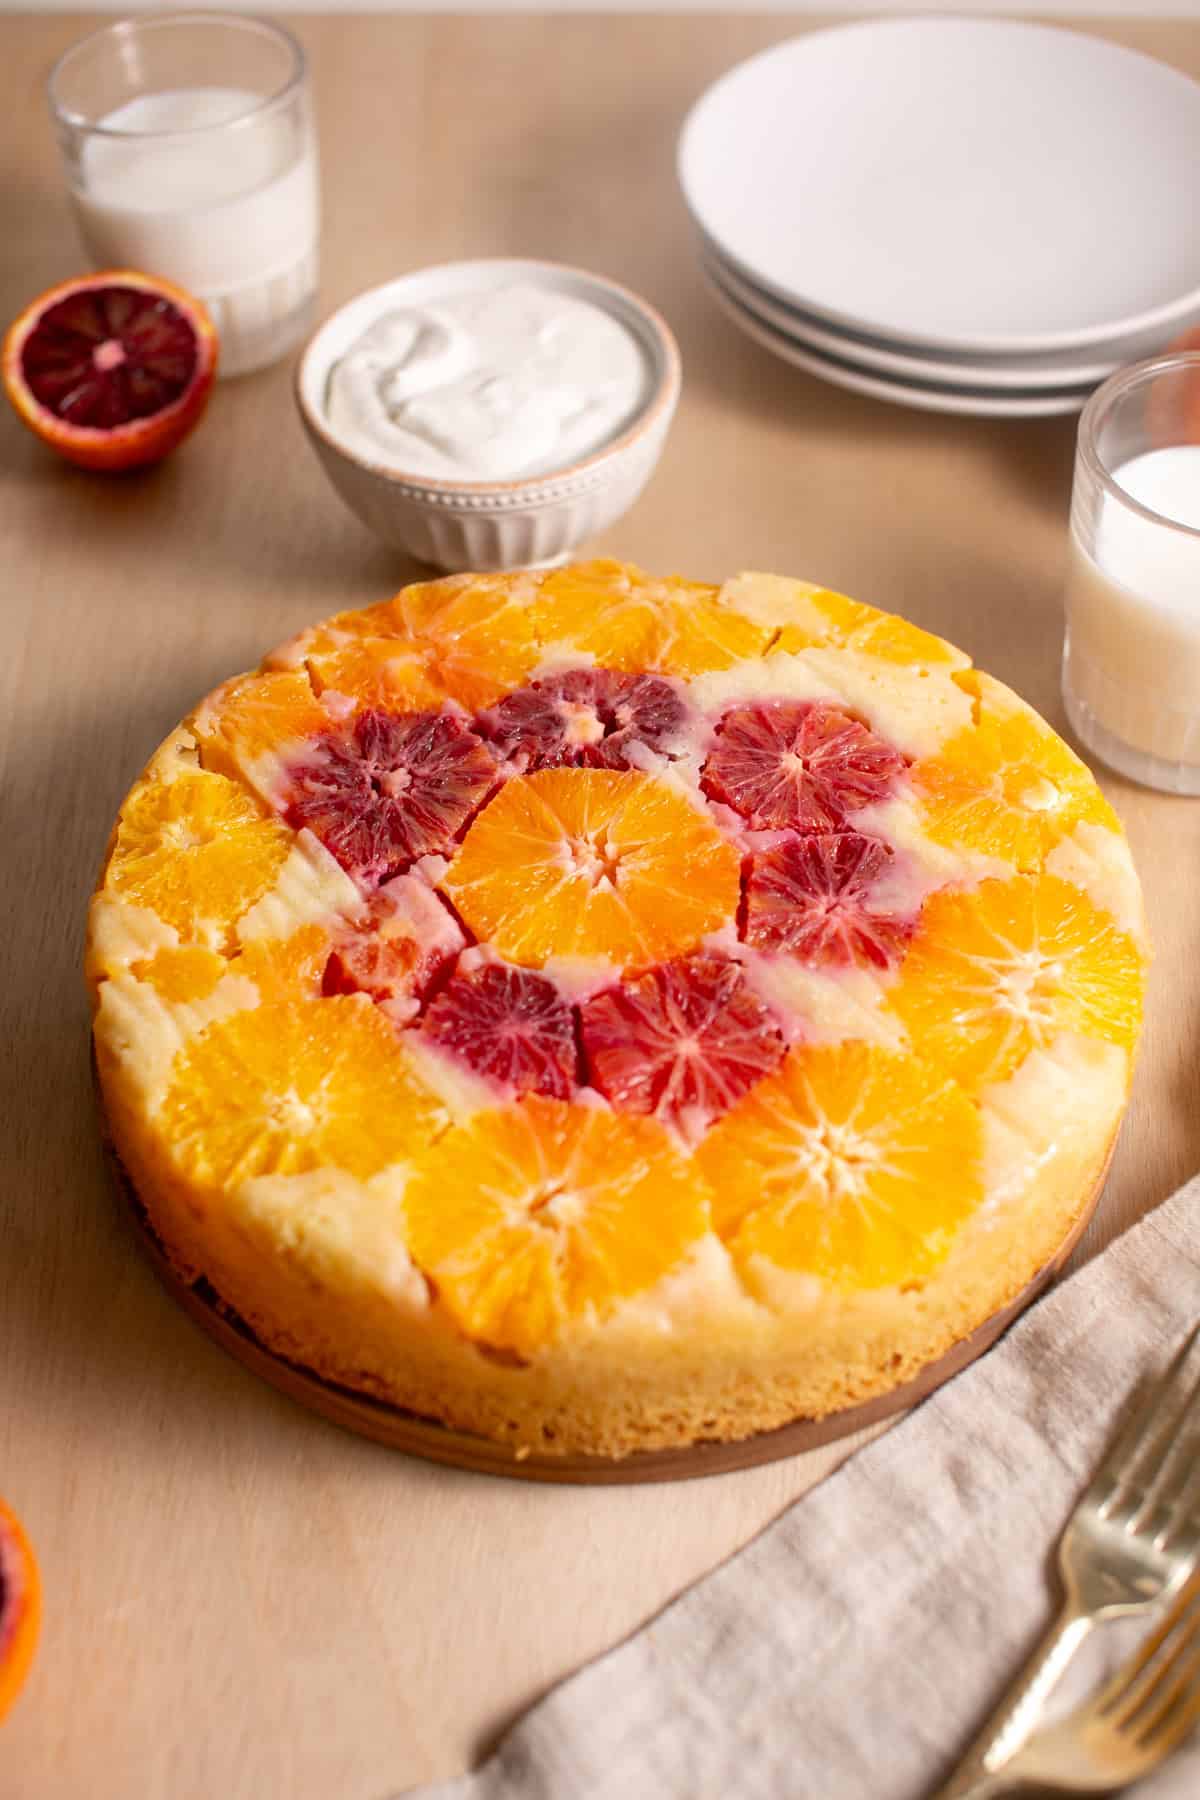 Winter Citrus cake on a wooden cutting board.